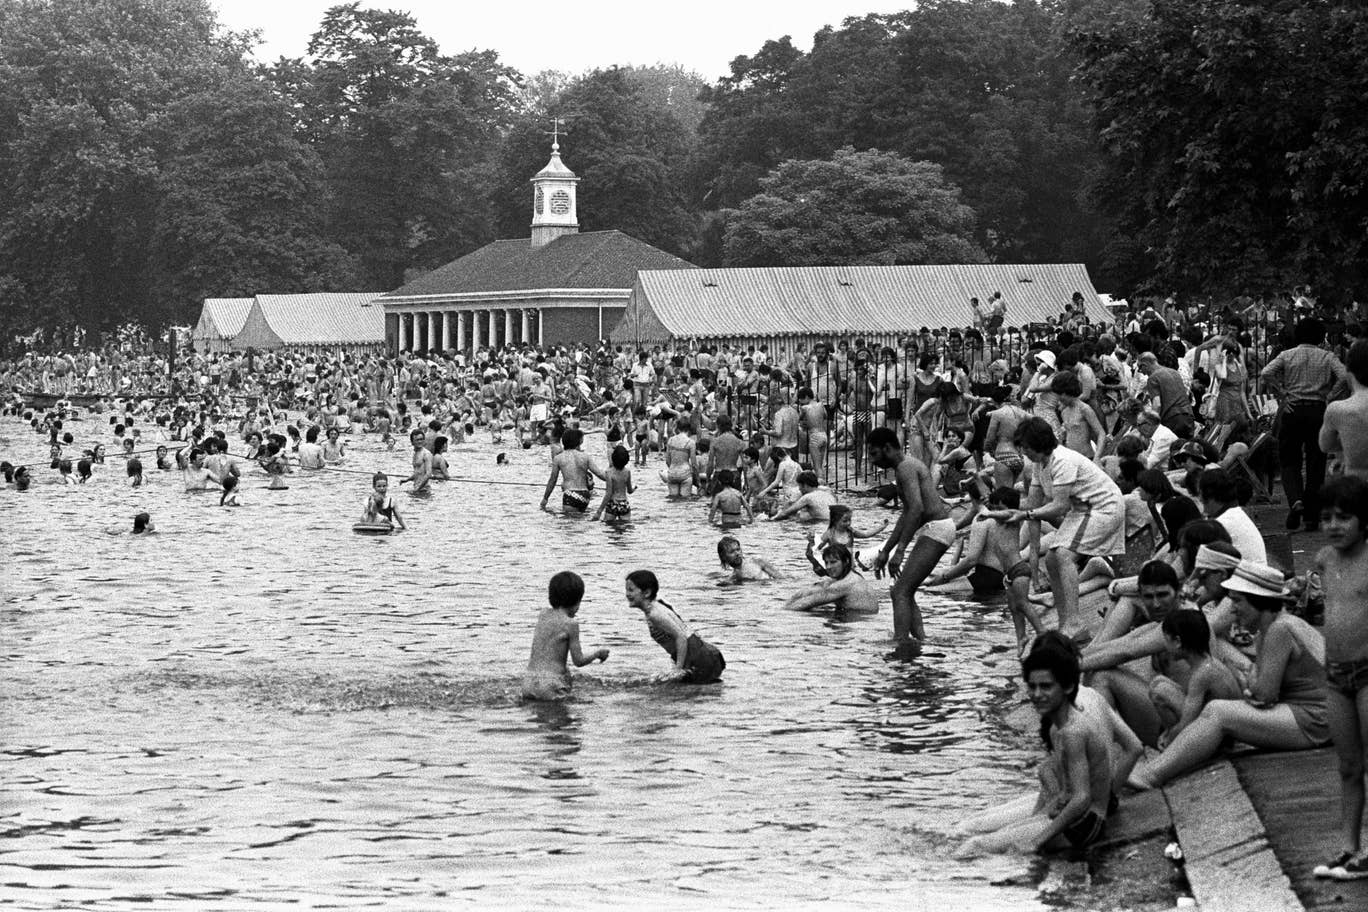 The scene at the Serpentine in London's Hyde Park as people enjoy the heatwave